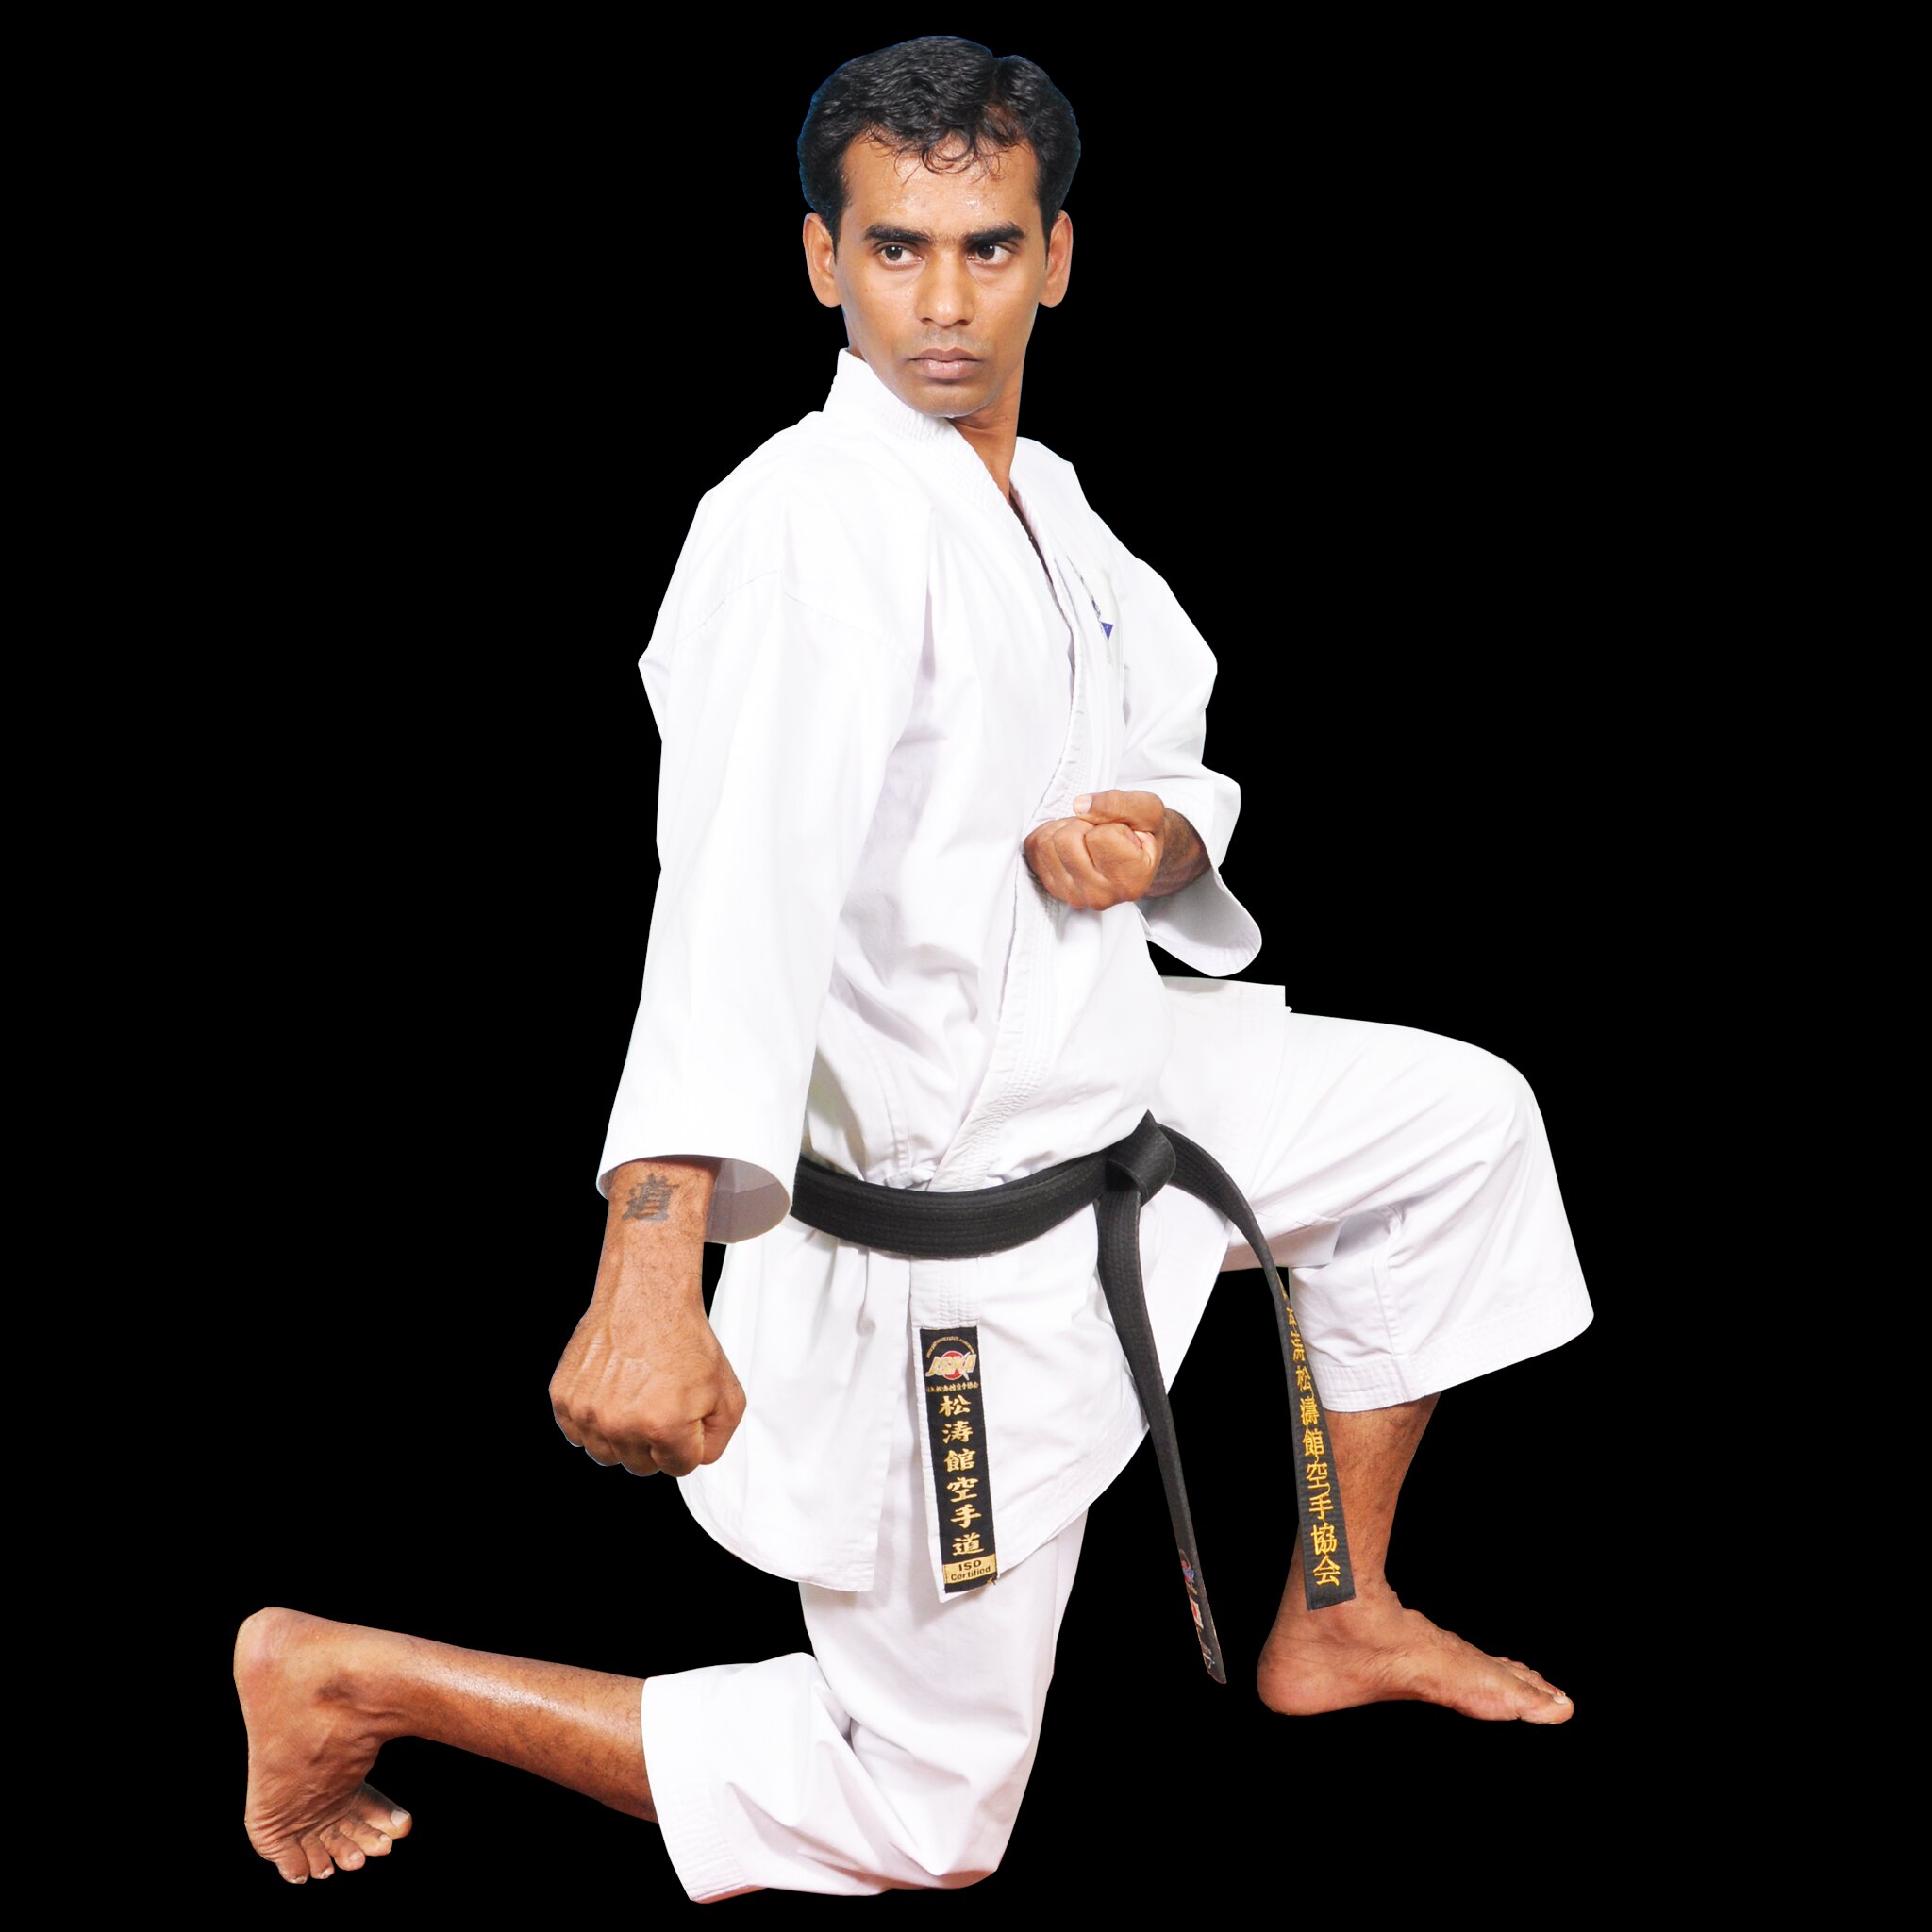 karate classes in trichy: May 2017